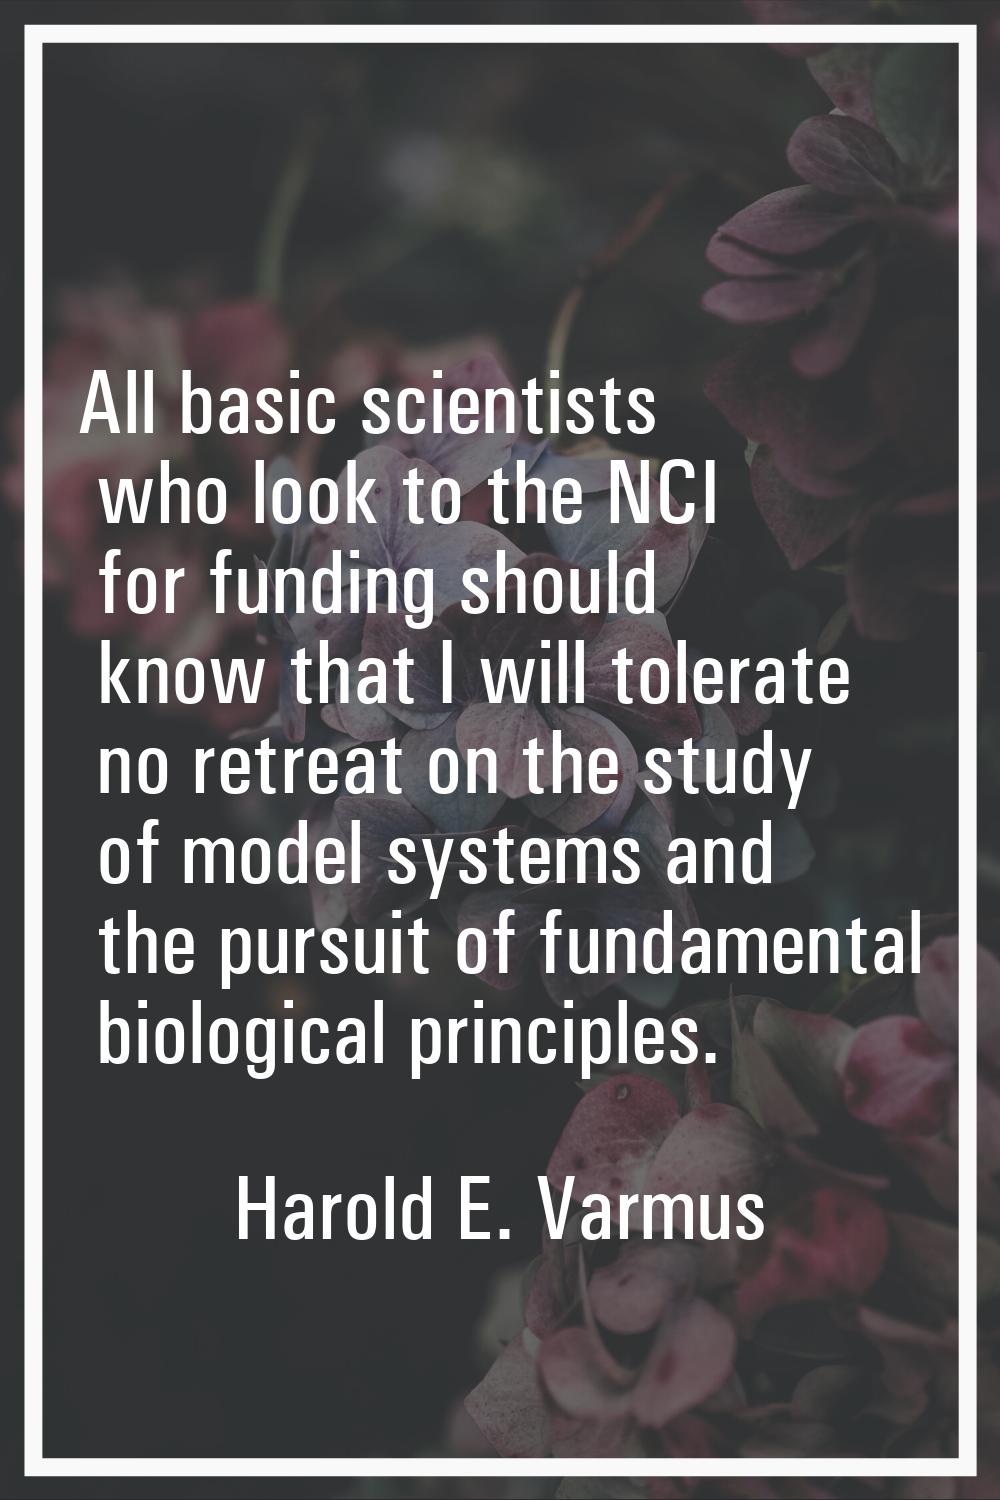 All basic scientists who look to the NCI for funding should know that I will tolerate no retreat on